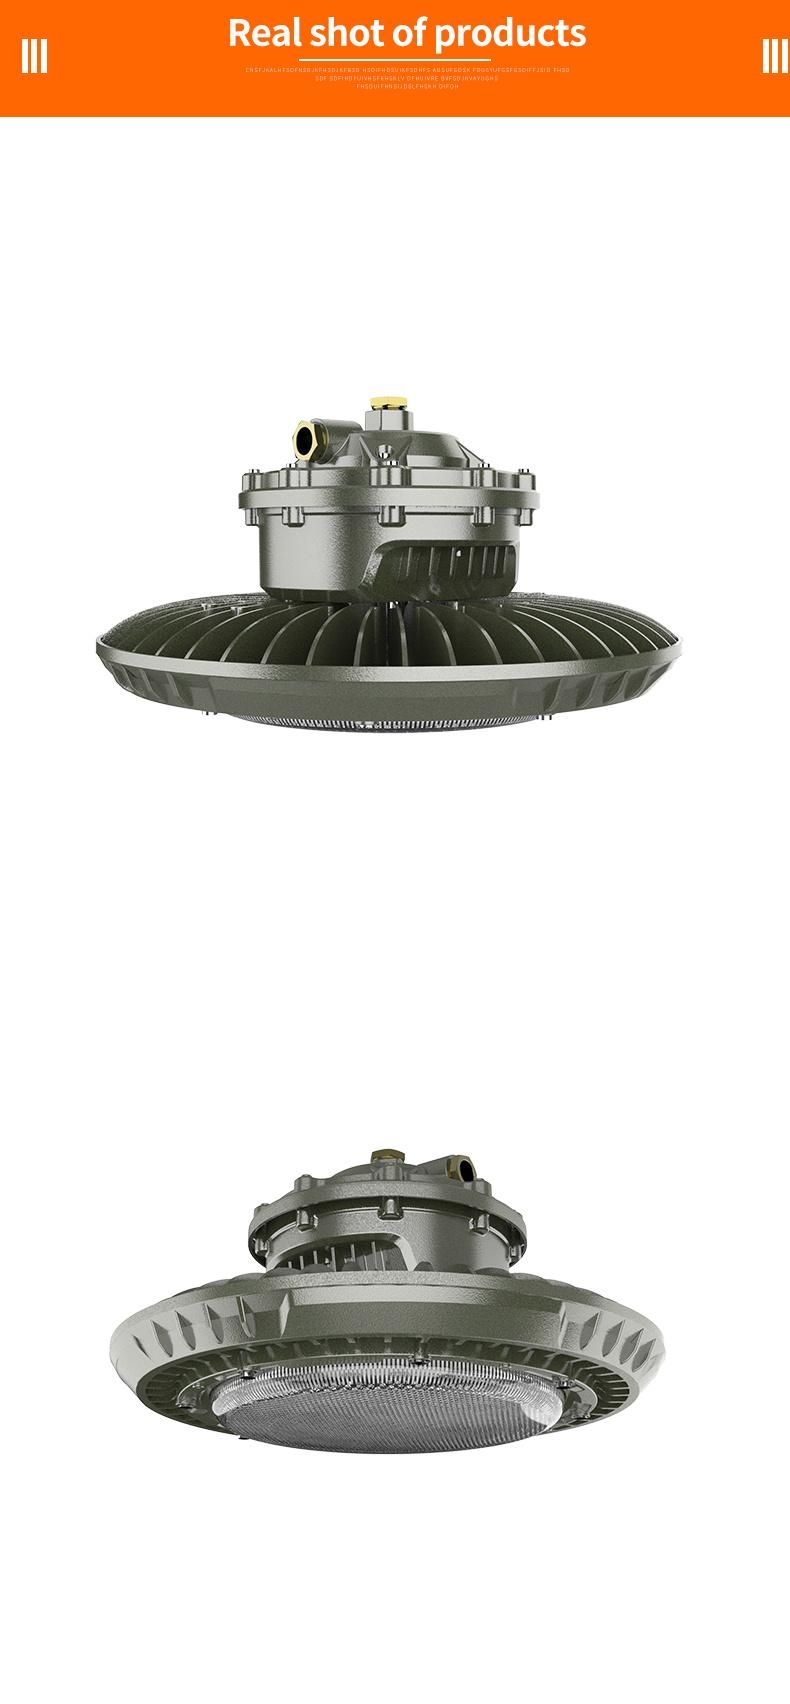 Atex LED Explosion-Proof High-Bay Lighting with High Efficiency